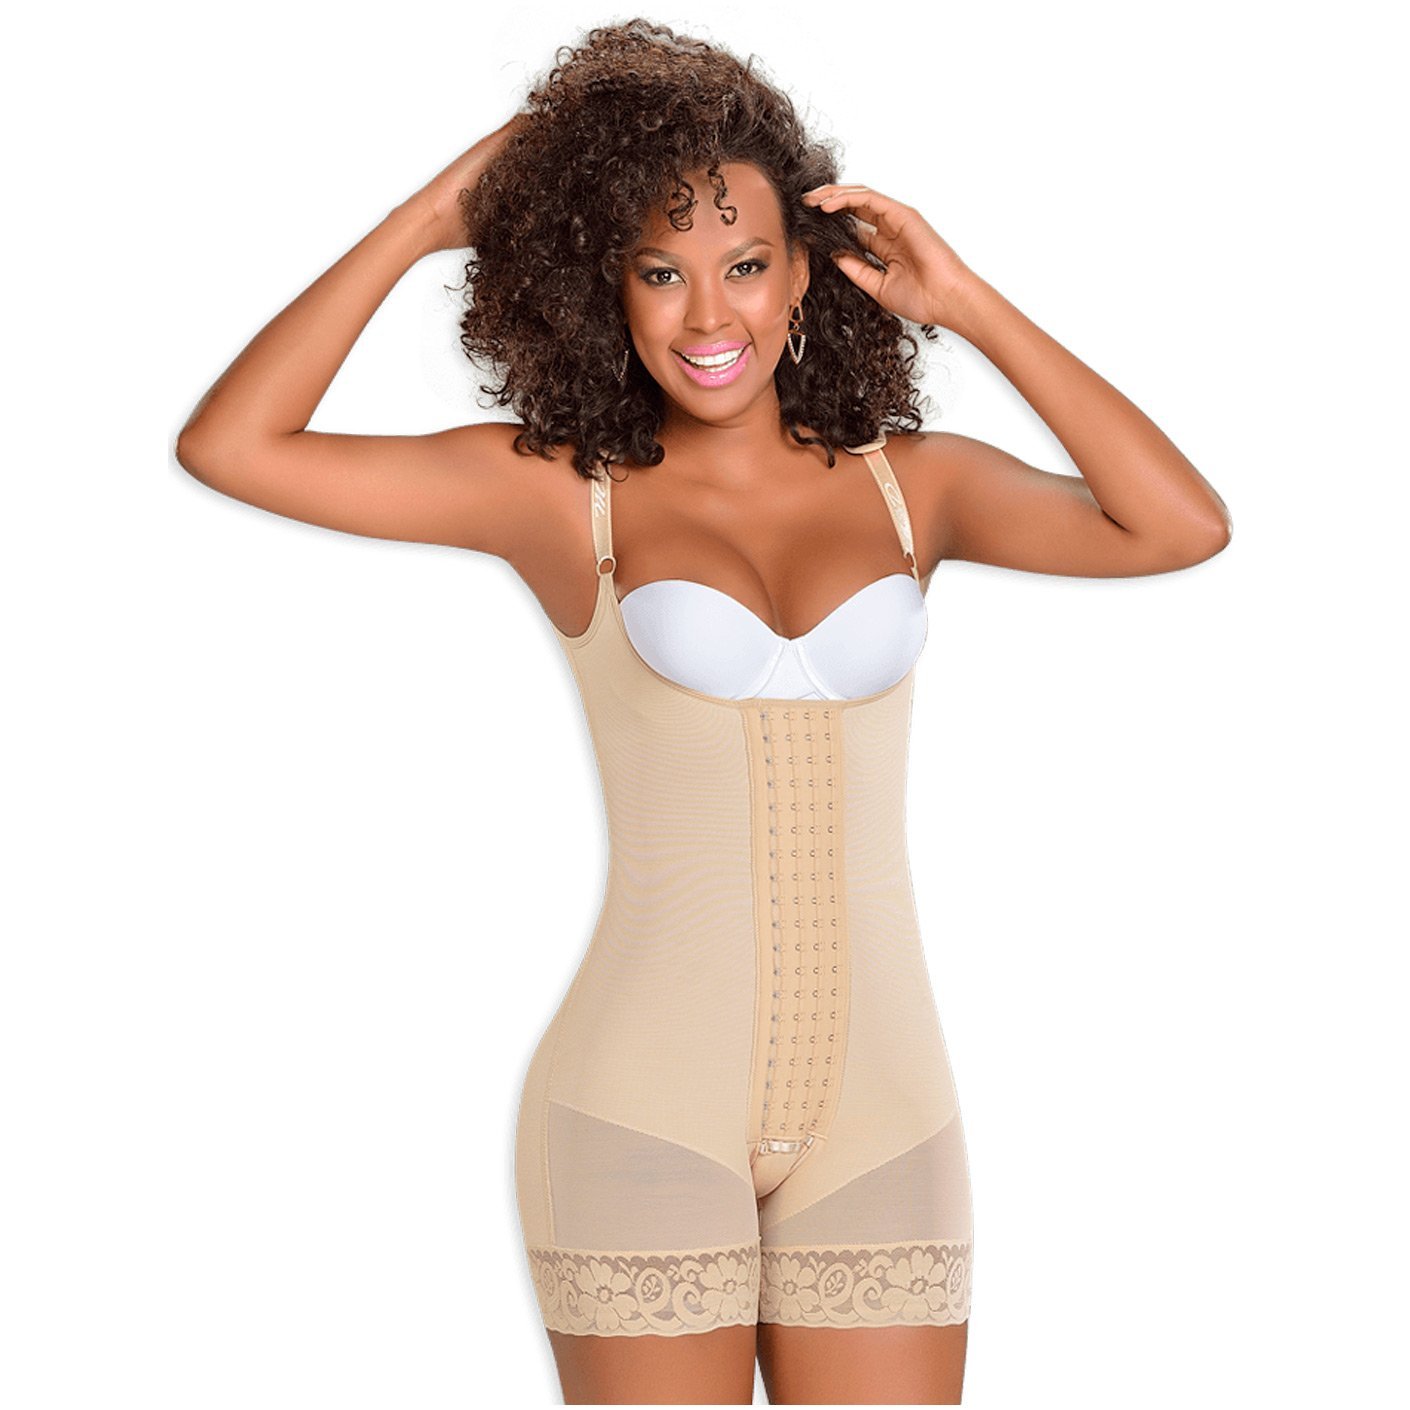 COMFREE Fajas Colombianas Body Shaper for Women Firm Mauritius